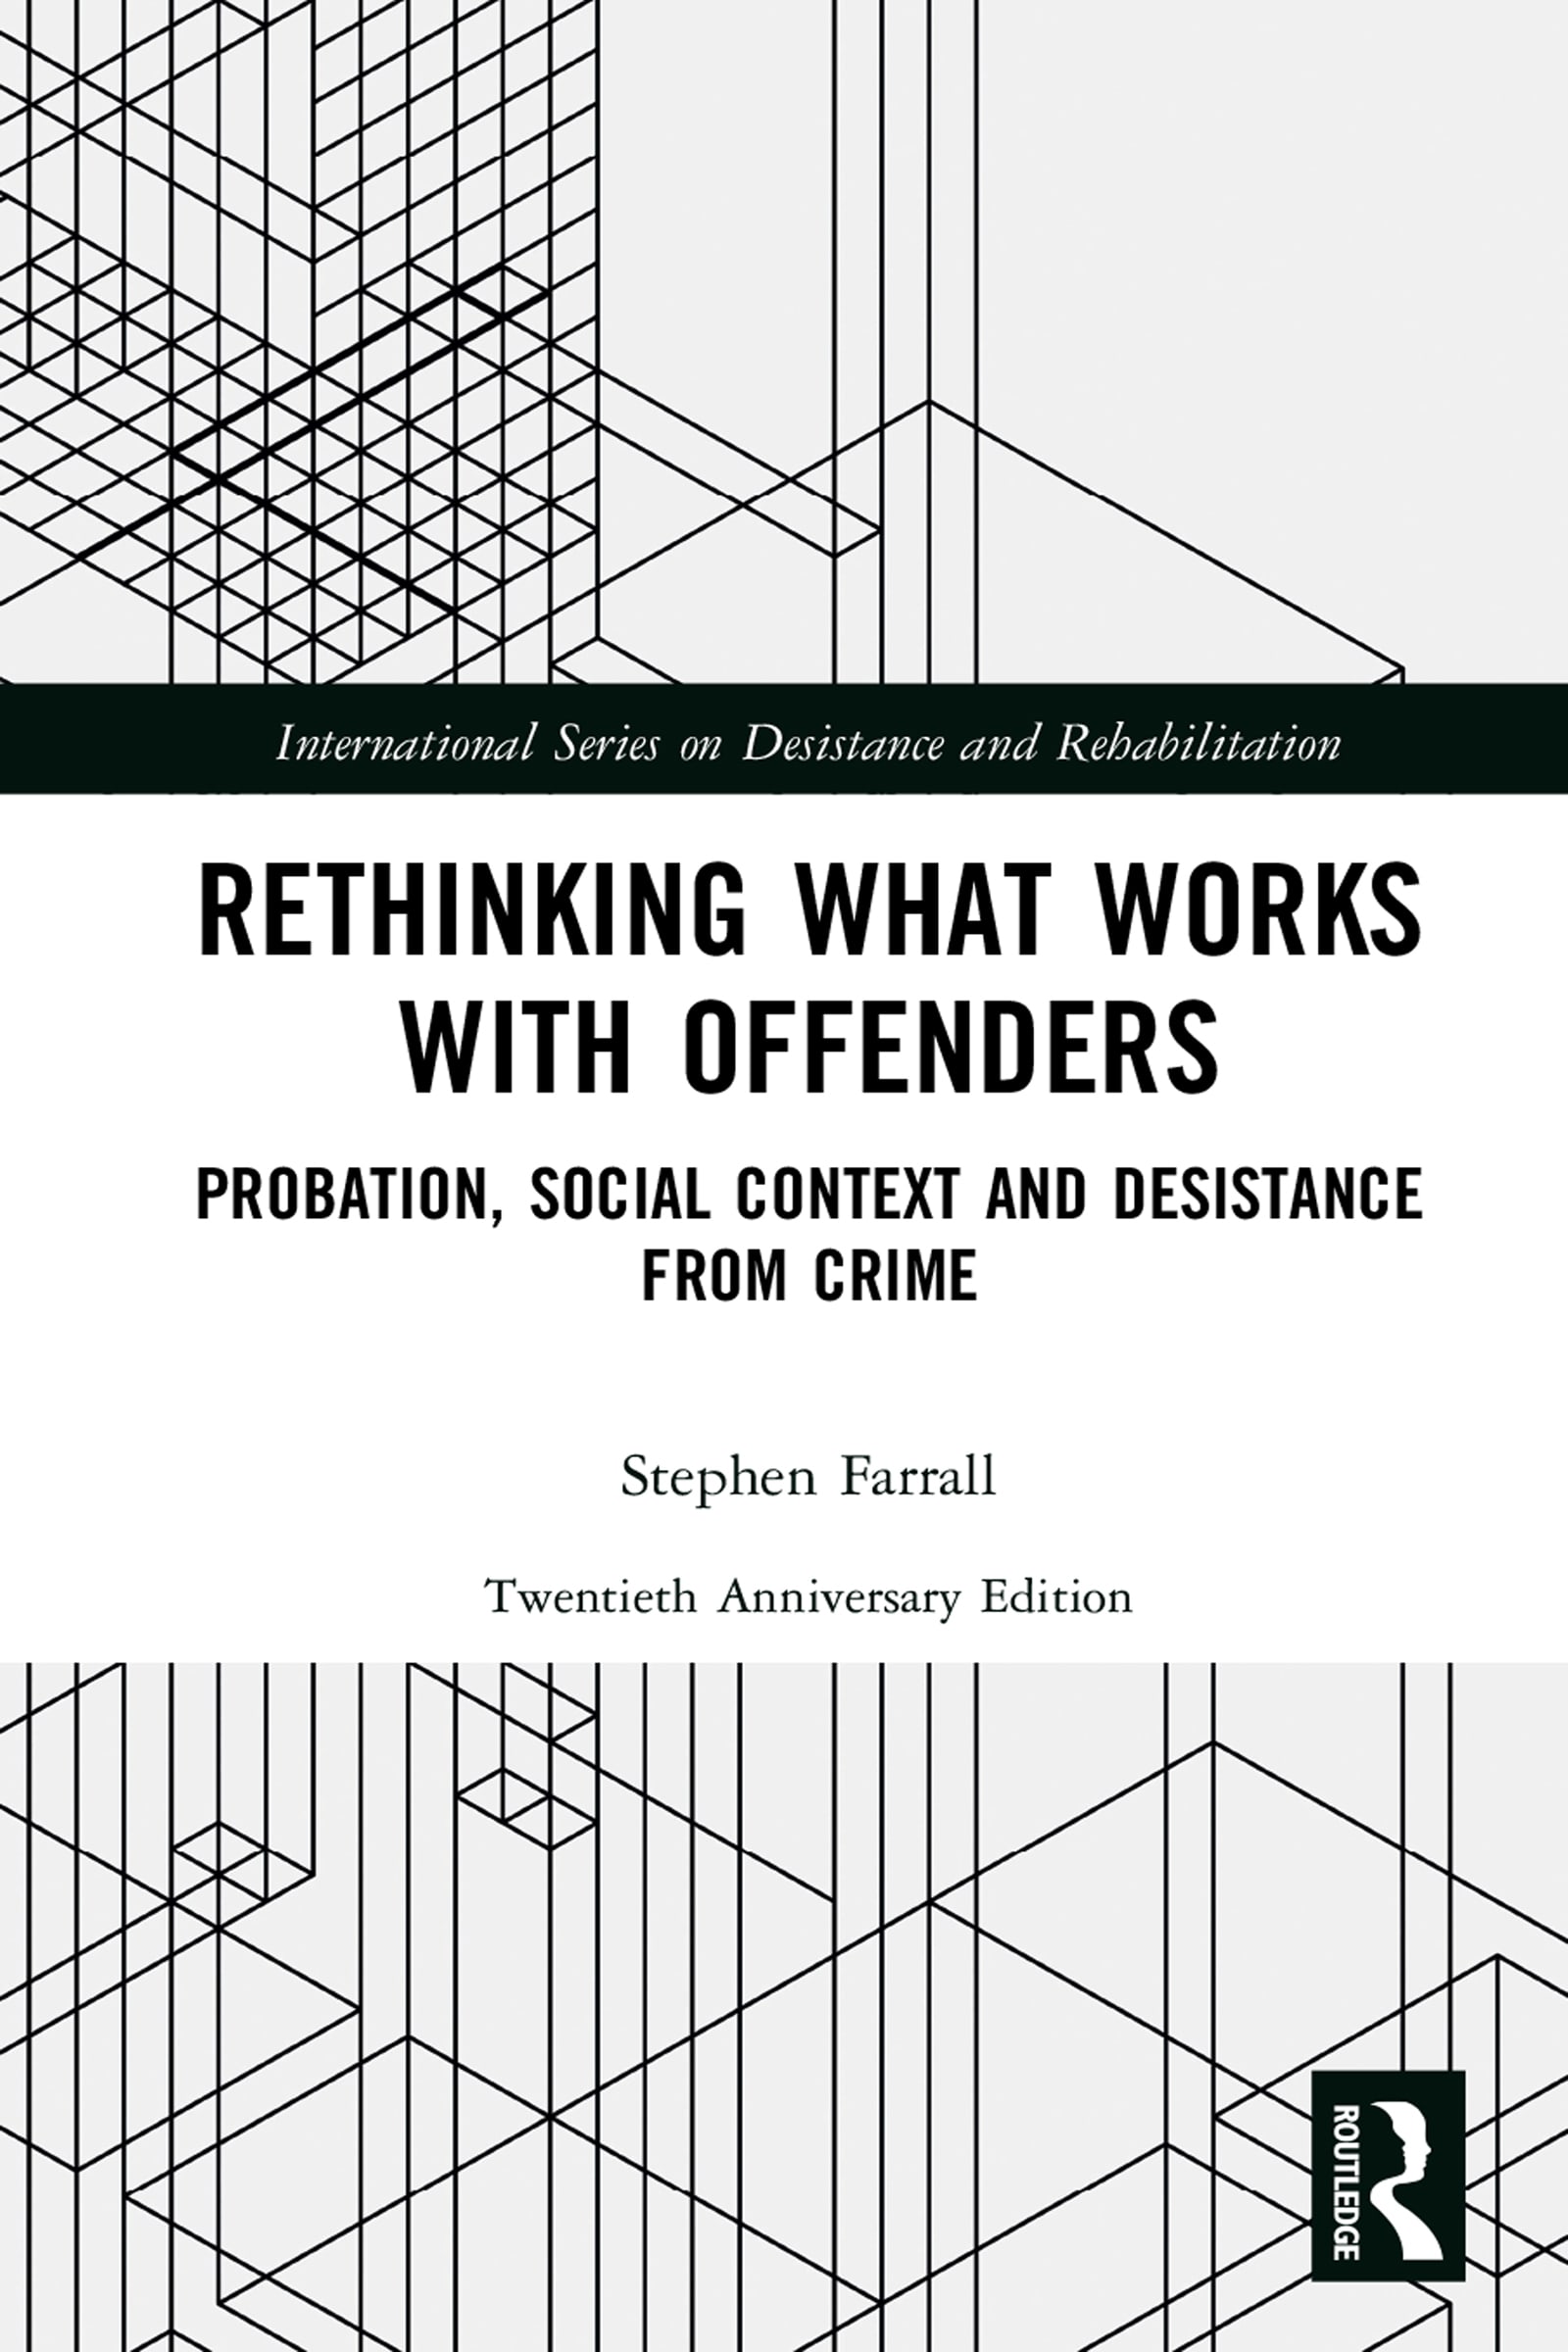 rethinking what works with offenders probation, social context and desistance from crime 1st edition stephen